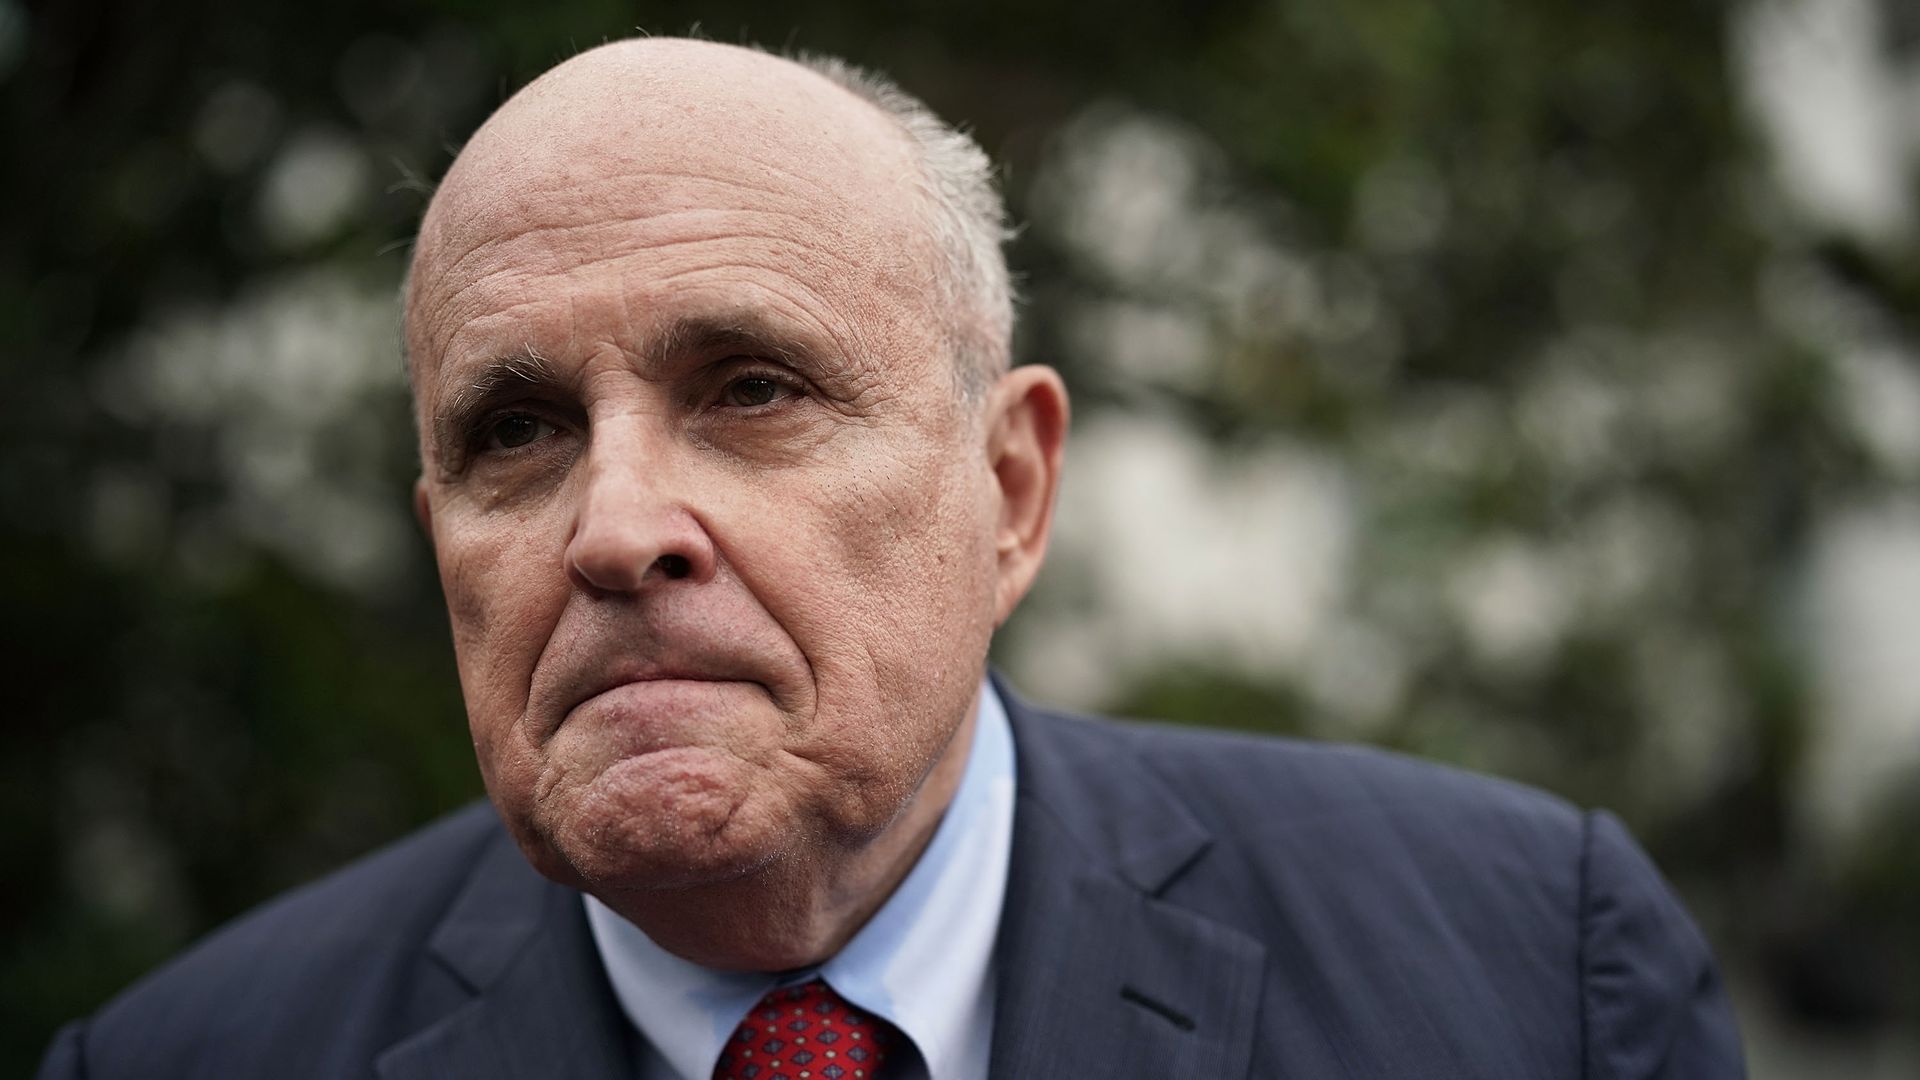 In this image, Rudy Giuliani frowns and walks outside, wearing a suit. 